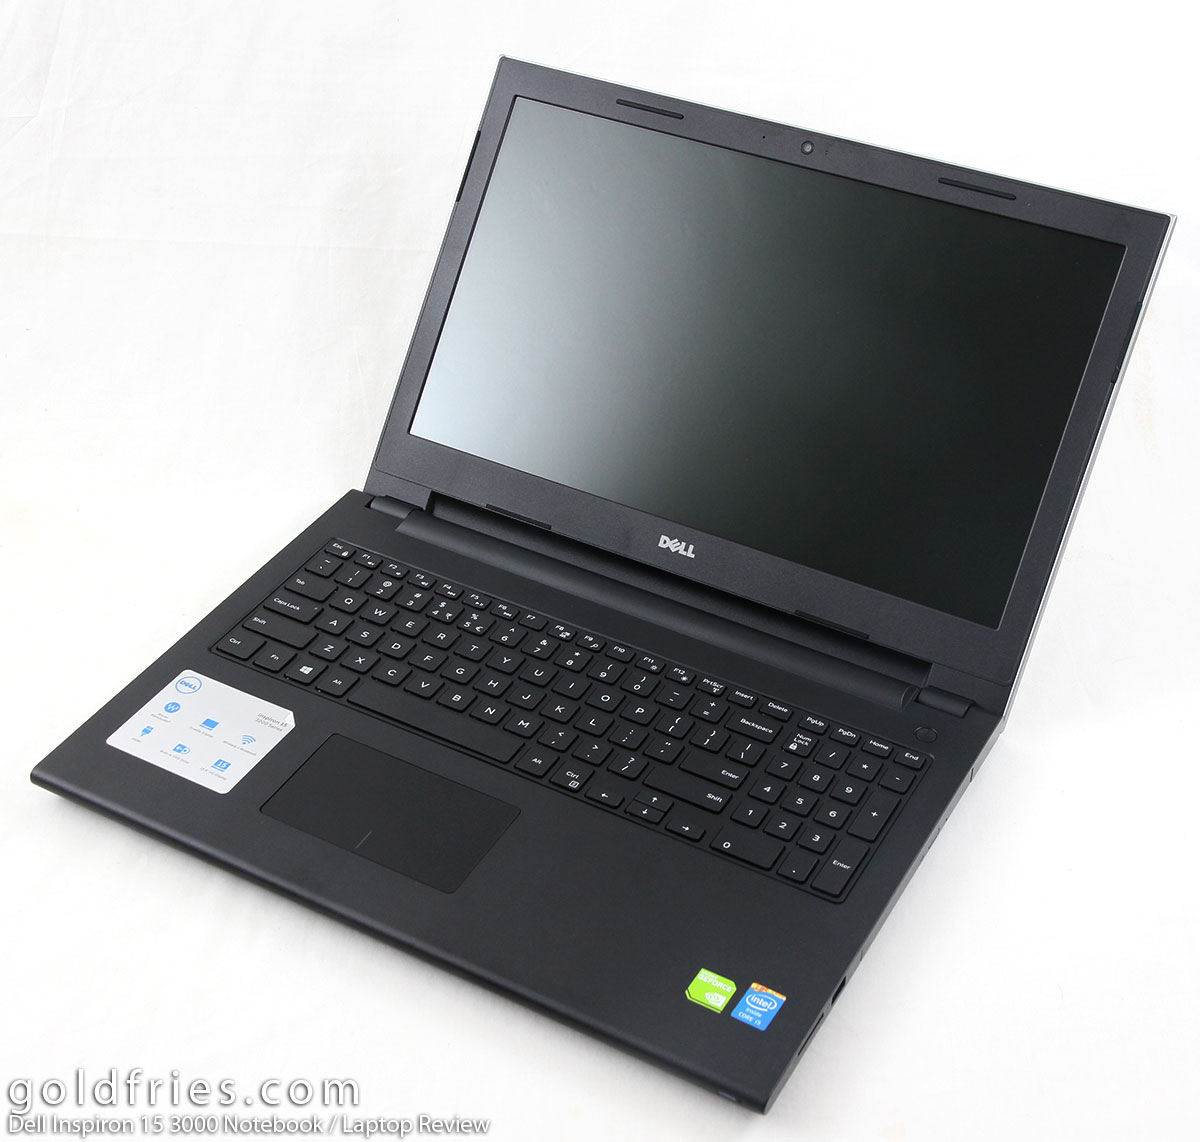 Dell Inspiron 15 3000 Notebook / Laptop Review ~ goldfries